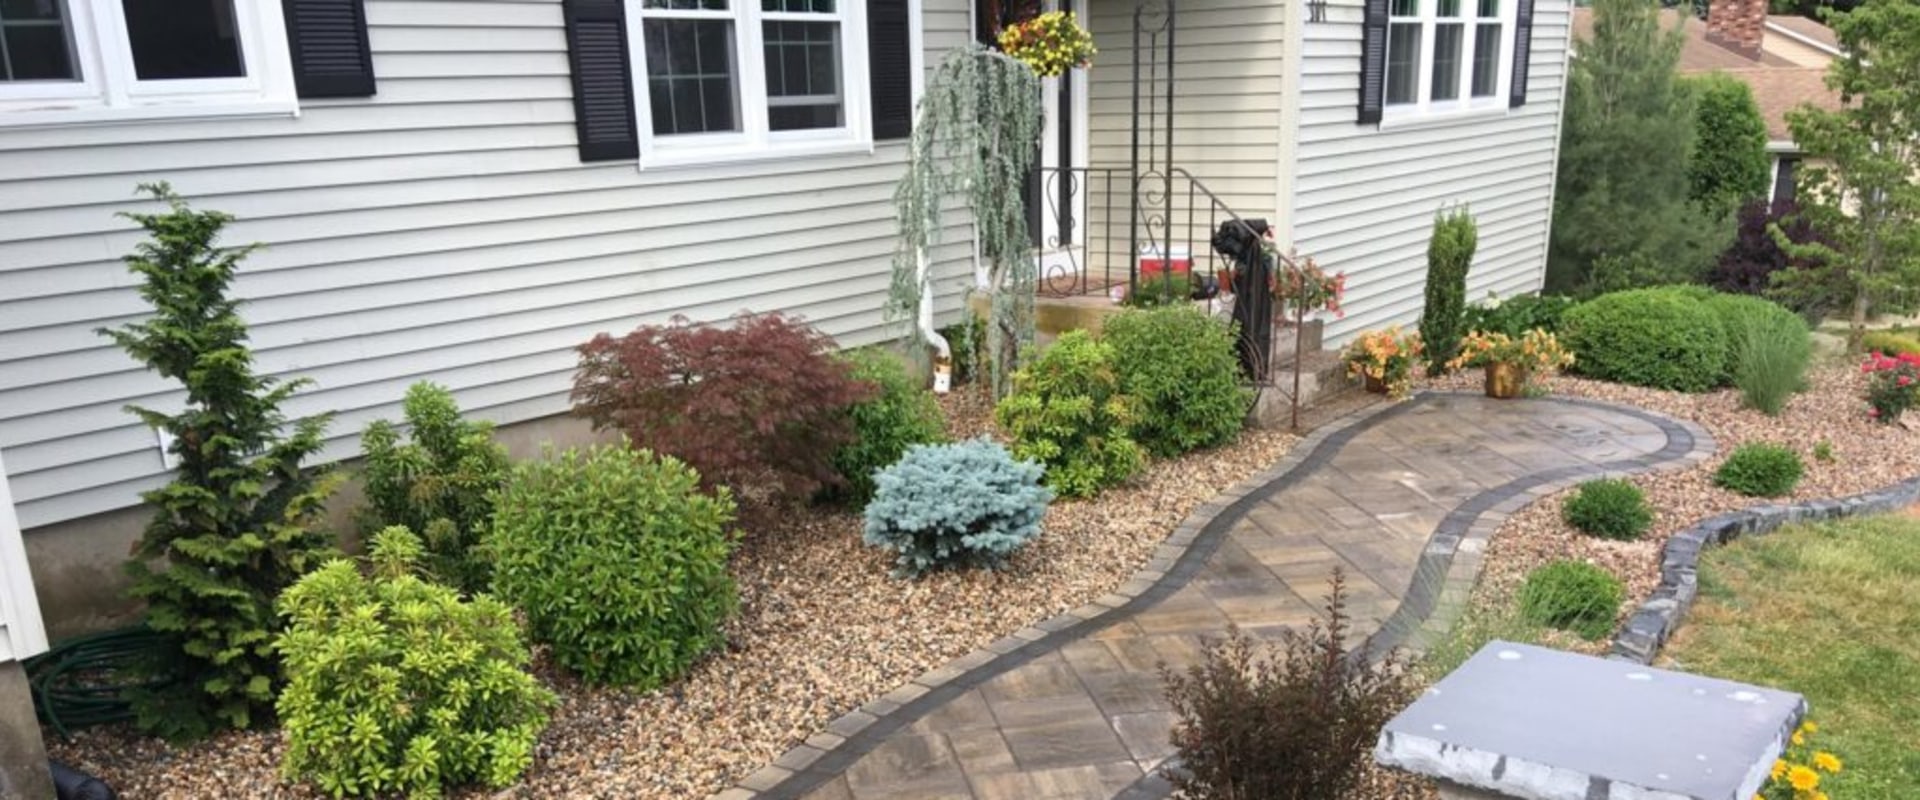 Enhance Your Curb Appeal With Professional Landscaping Services in Newington, CT: Discover How Expert Landscapers Can Make A Difference